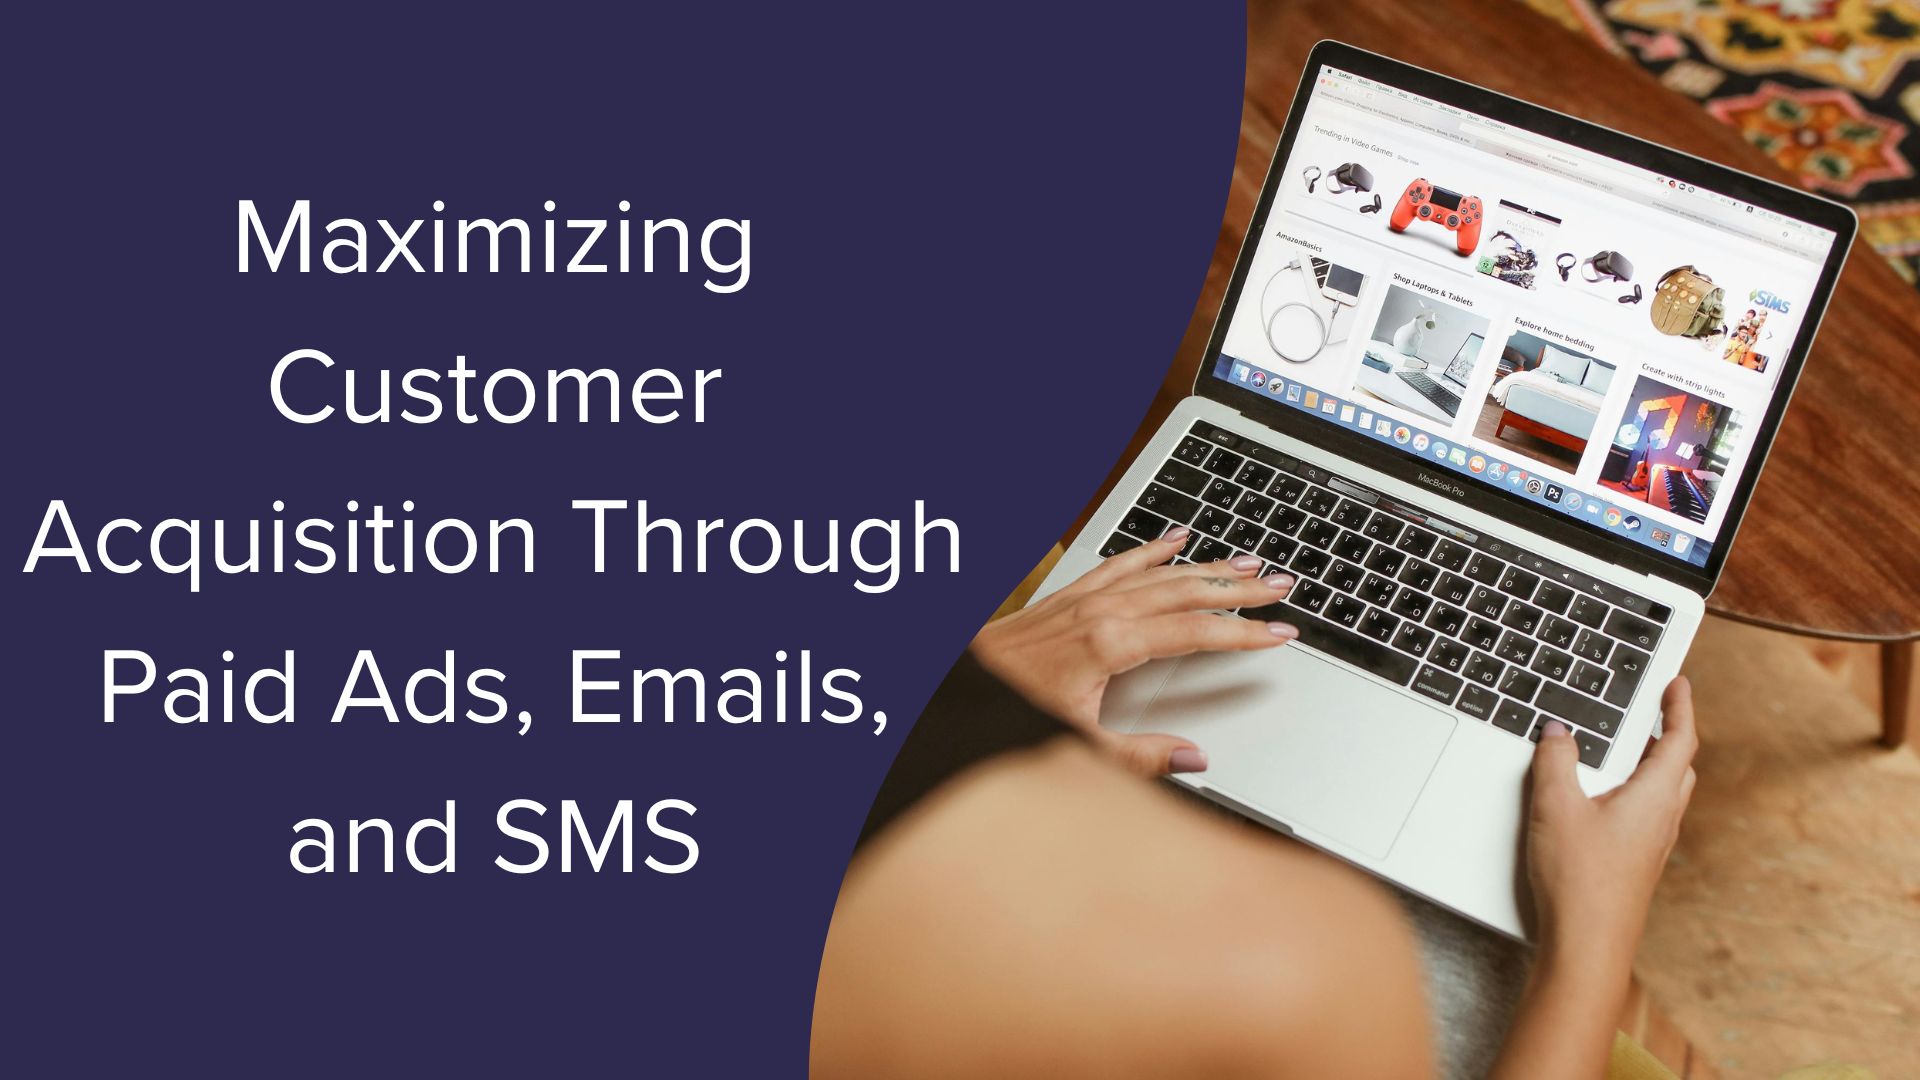 Maximizing Customer Acquisition Through Paid Ads, Emails, and SMS